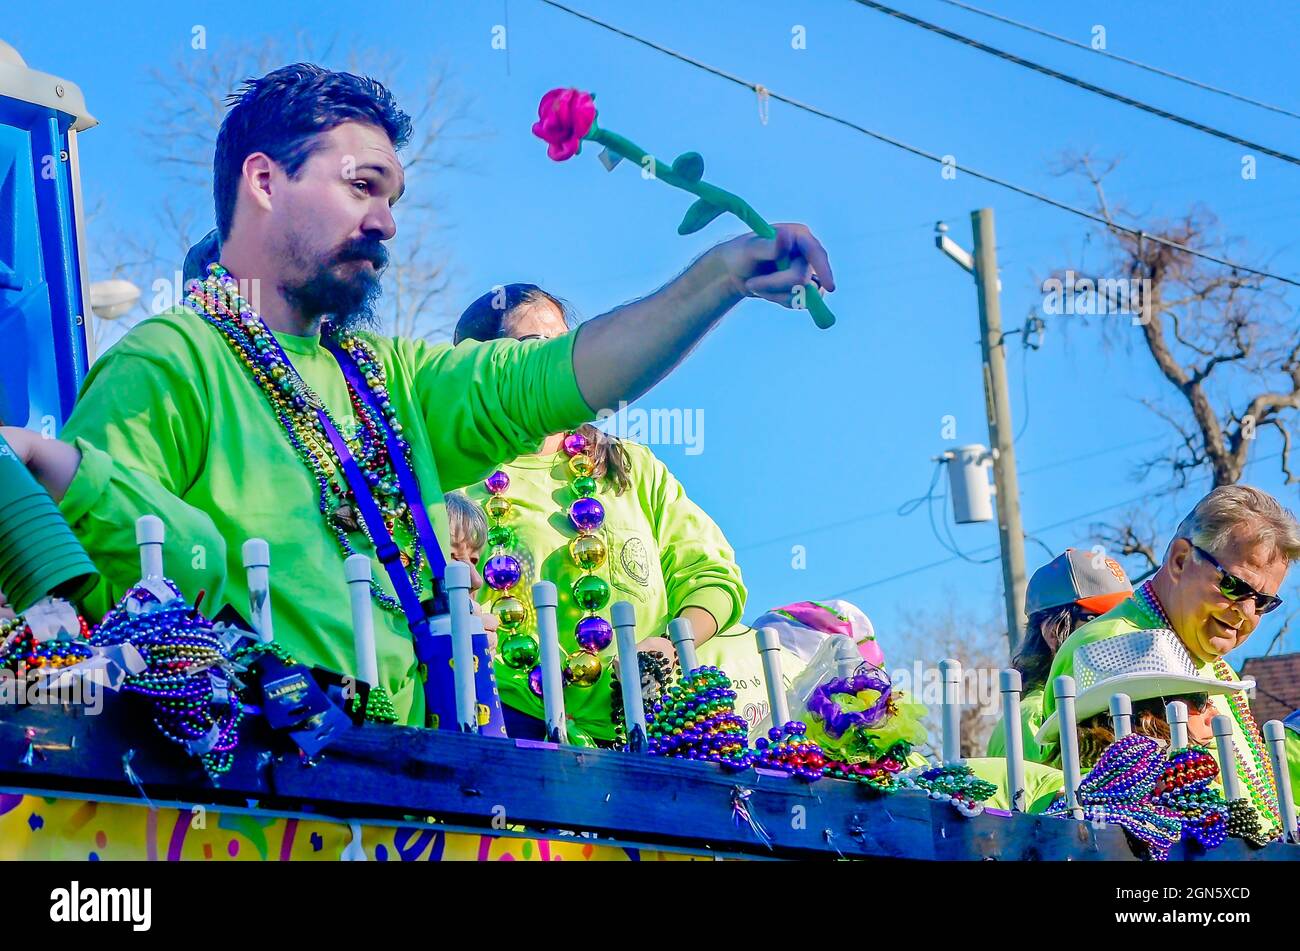 A man waves a rose from a Mardi Gras float during the Joe Cain Day Mardi Gras parade, Feb. 7, 2016, in Mobile, Alabama. Stock Photo